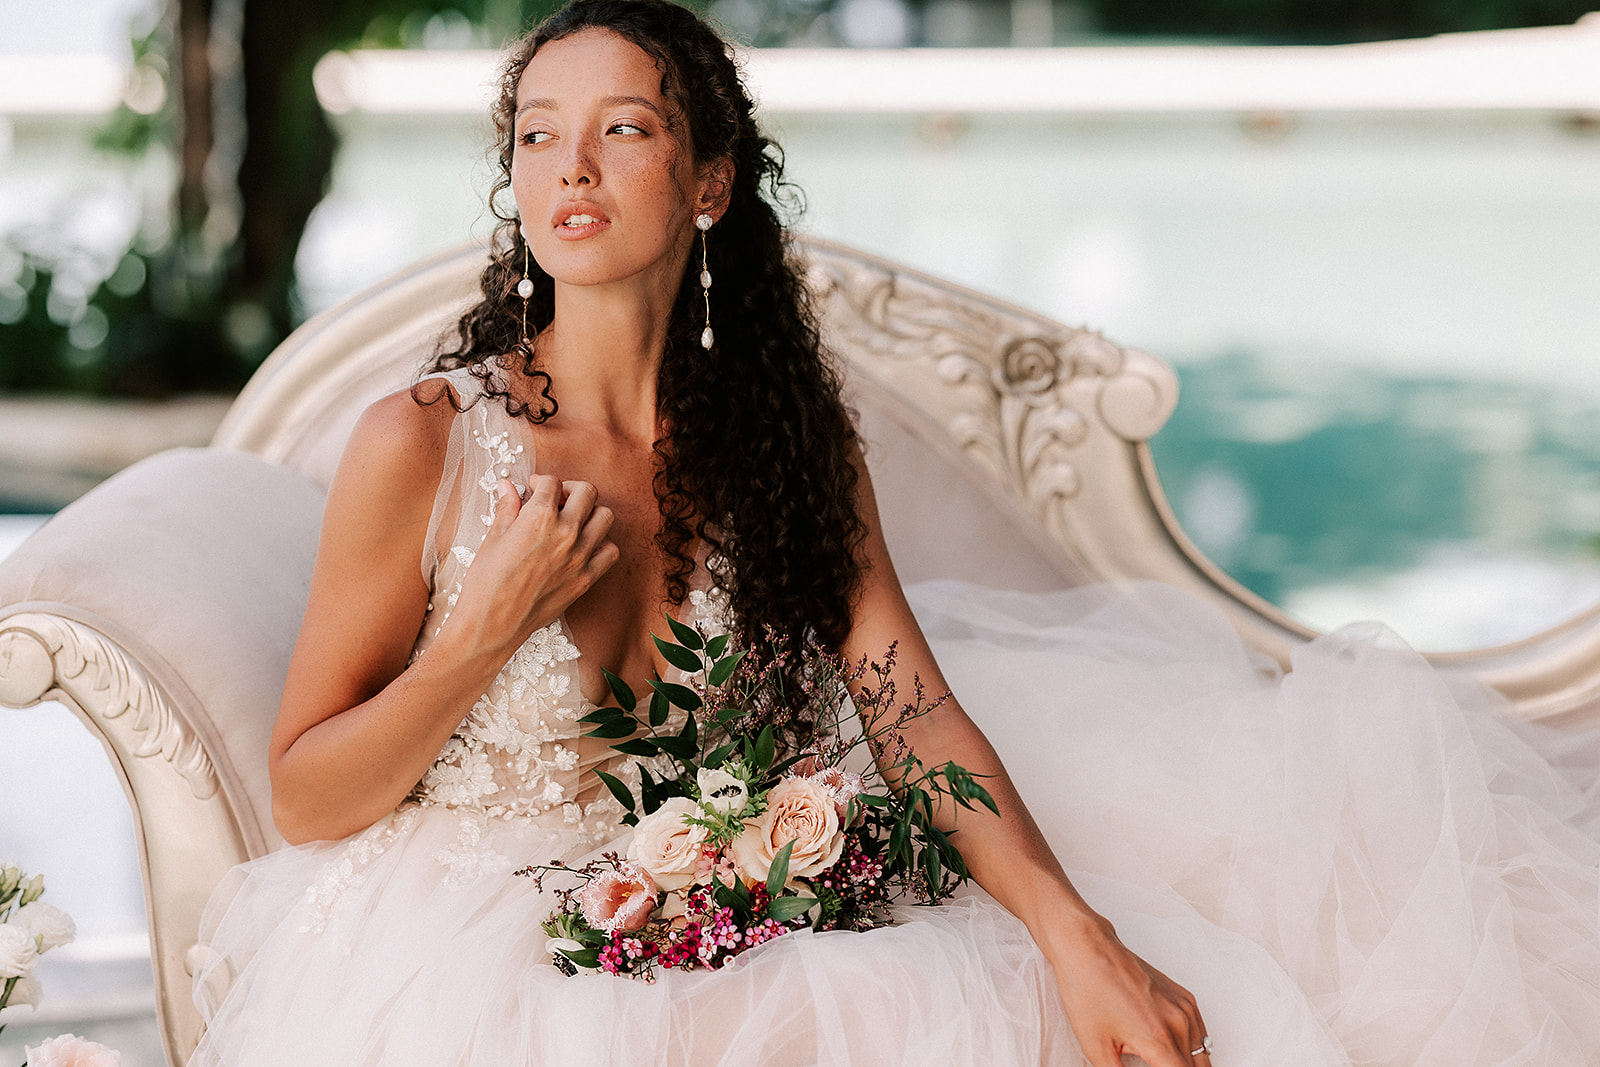 Bride modelling on a couch with a bouquet on her lap and water in the background